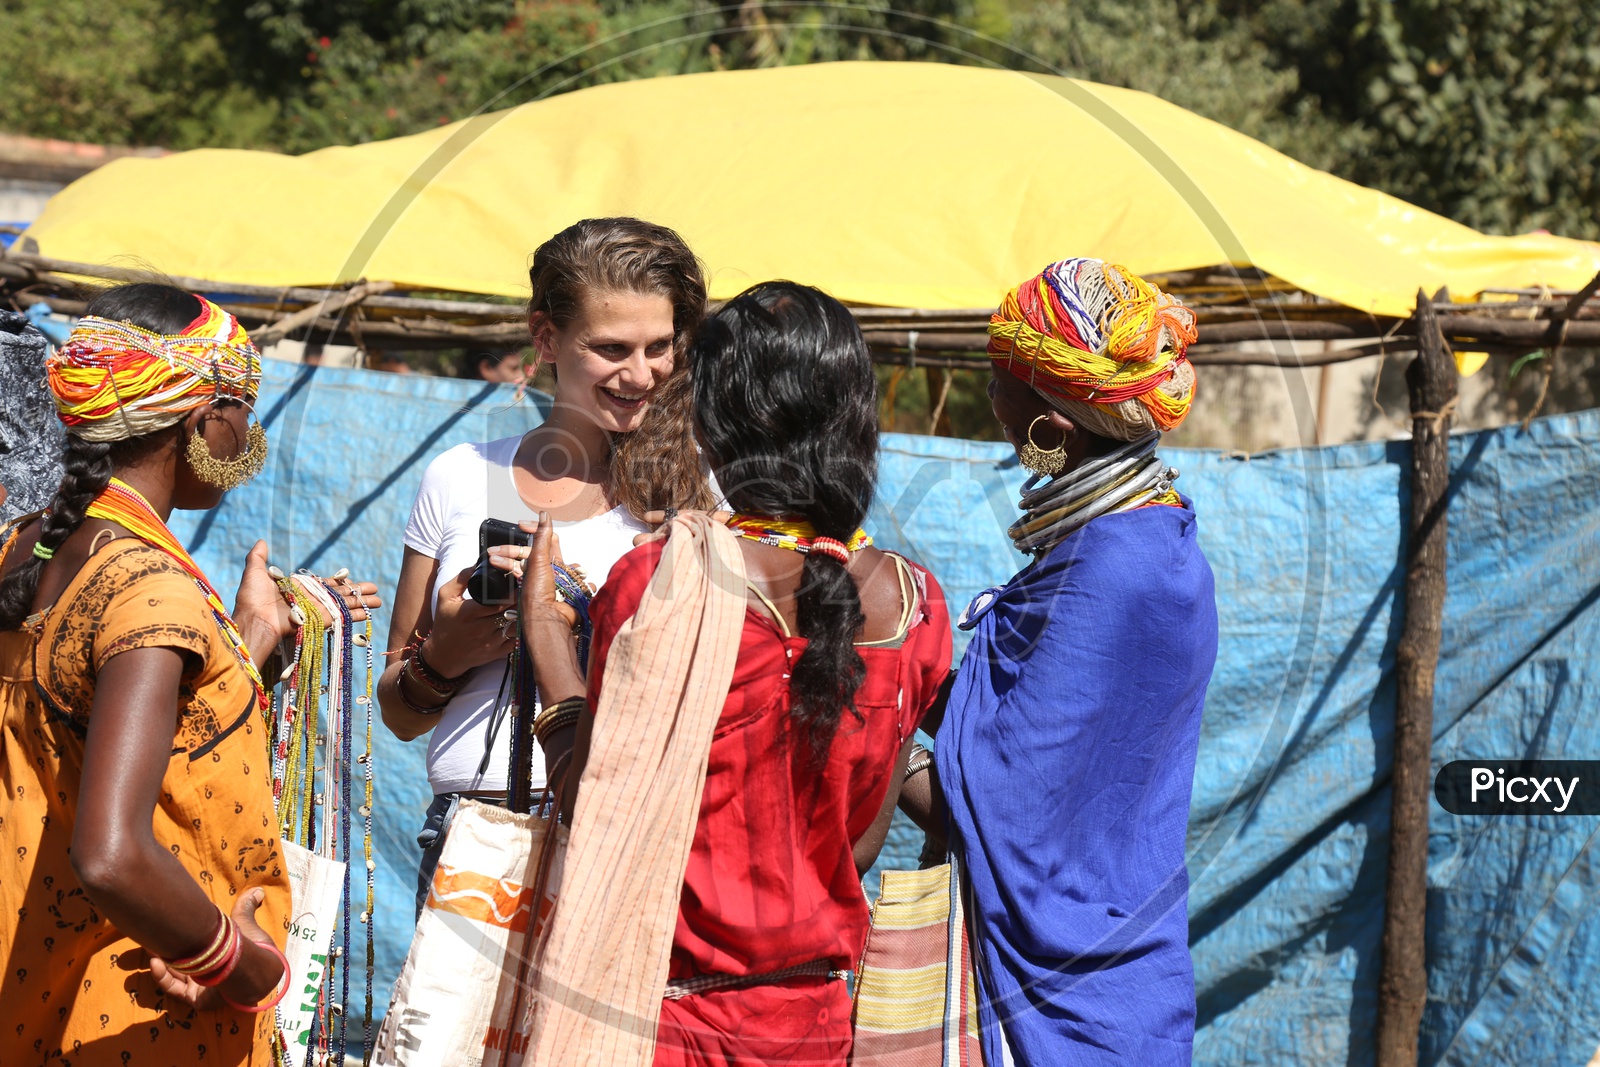 Foreigners Or tourists Purchasing Local Handmade Art Crafts From Bonda Tribe People At a Local Market in Tribal Villages